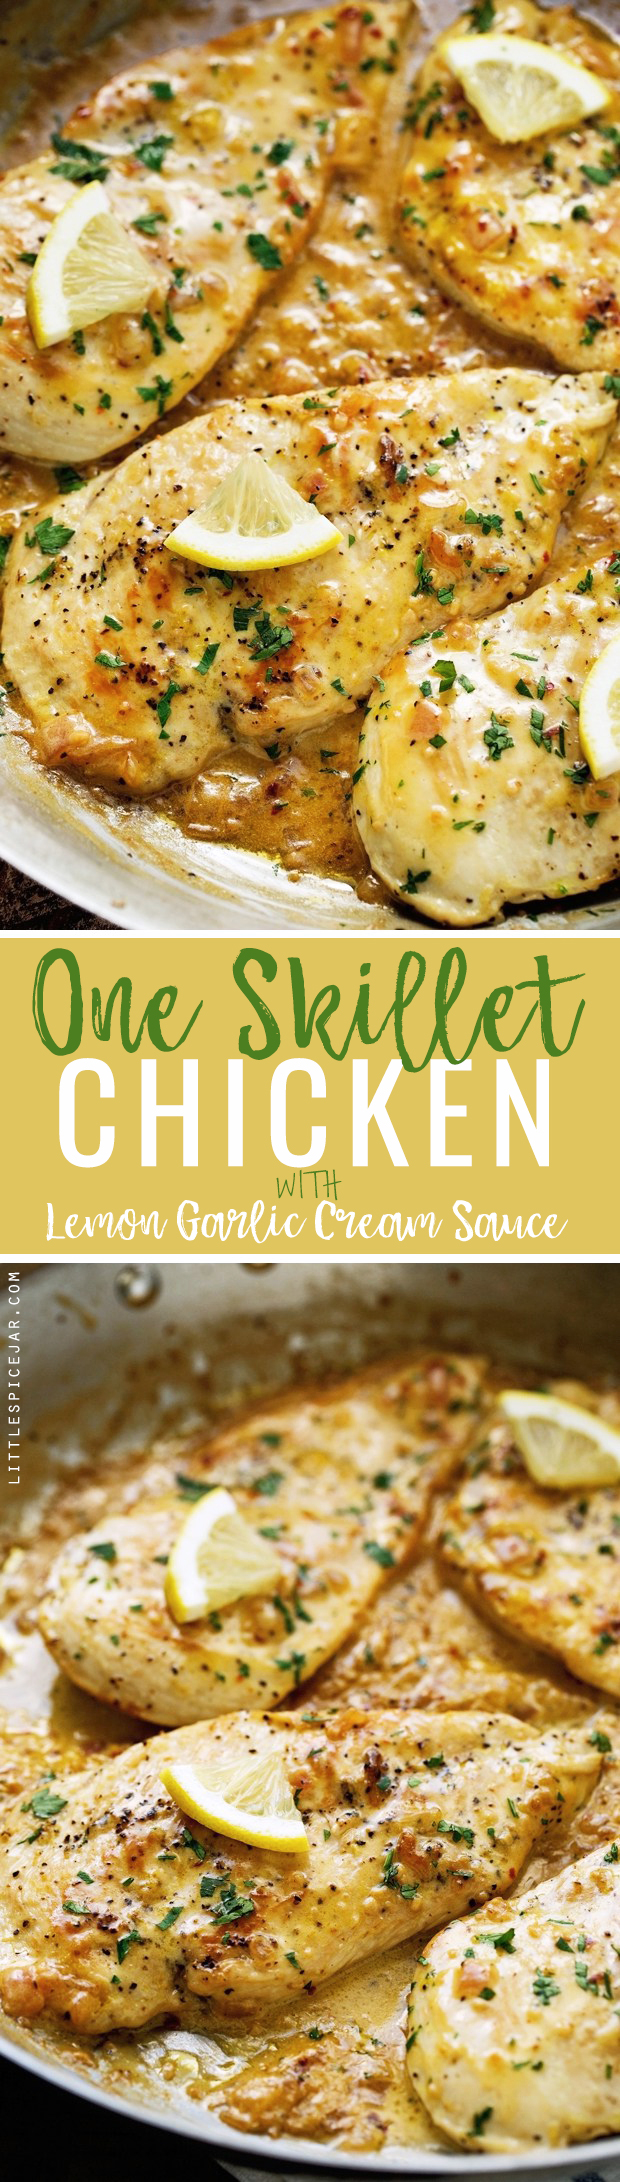 One Skillet Chicken topped with A Lemon garlic Cream Sauce - Ready in 30 minutes are perfect over a bed of angel hair pasta! #lemonchicken #skilletchicken #oneskilletchicken | Littlespicejar.com @littlespicejar